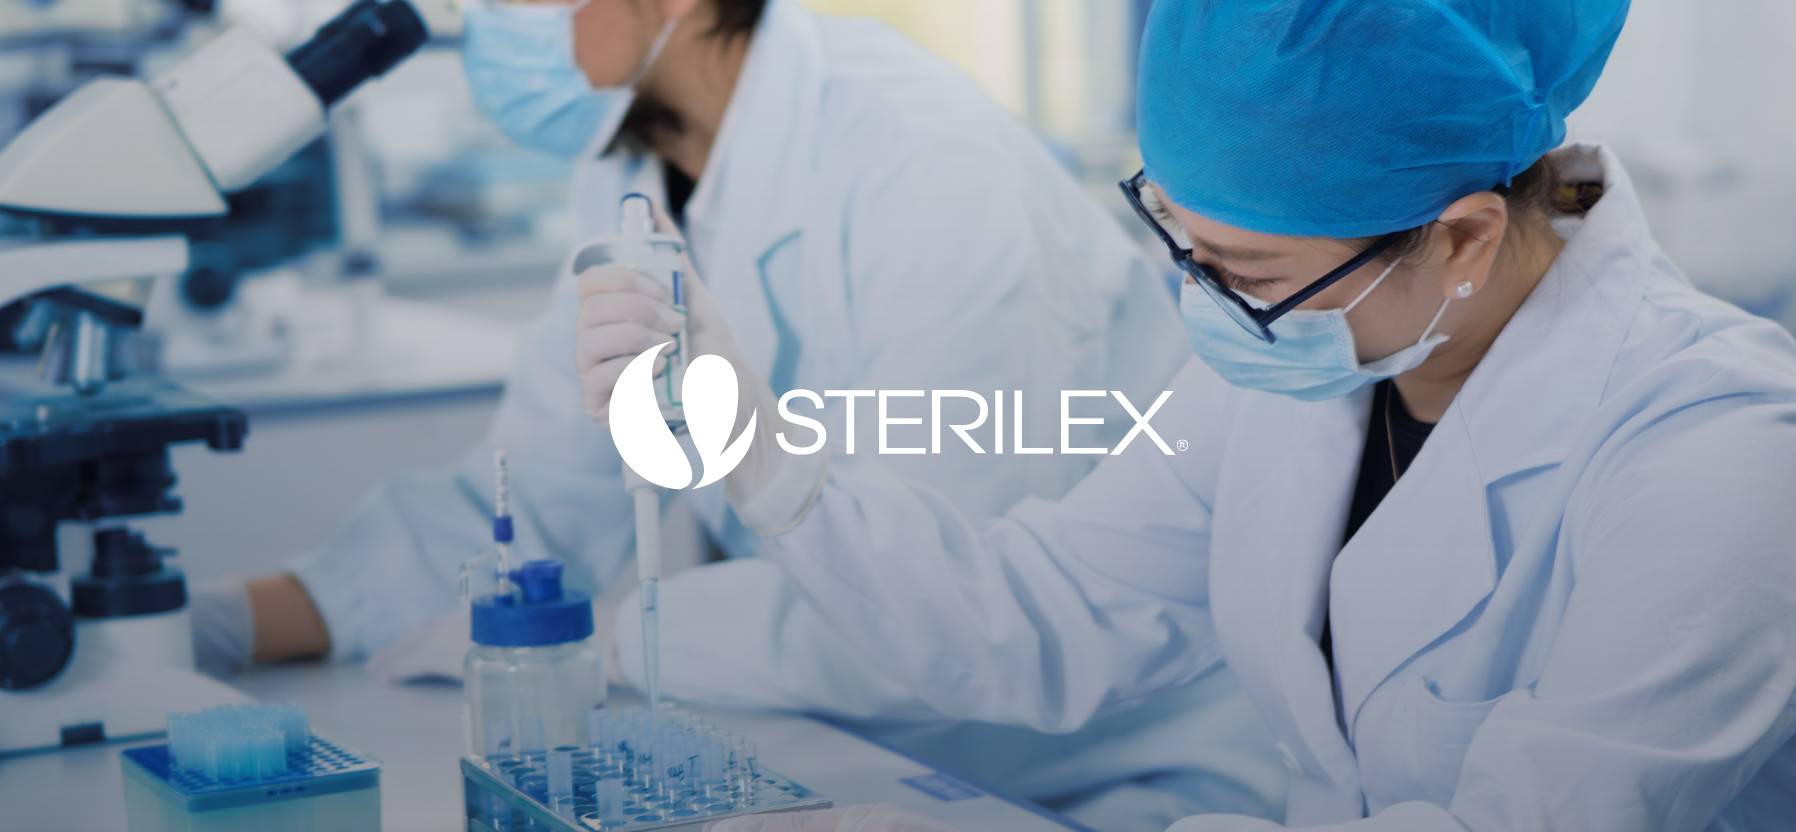 Paine Schwartz Makes Strategic Investment in Sterilex Leading Provider of Innovative Disinfection and Microbial Control Solution@2x-2